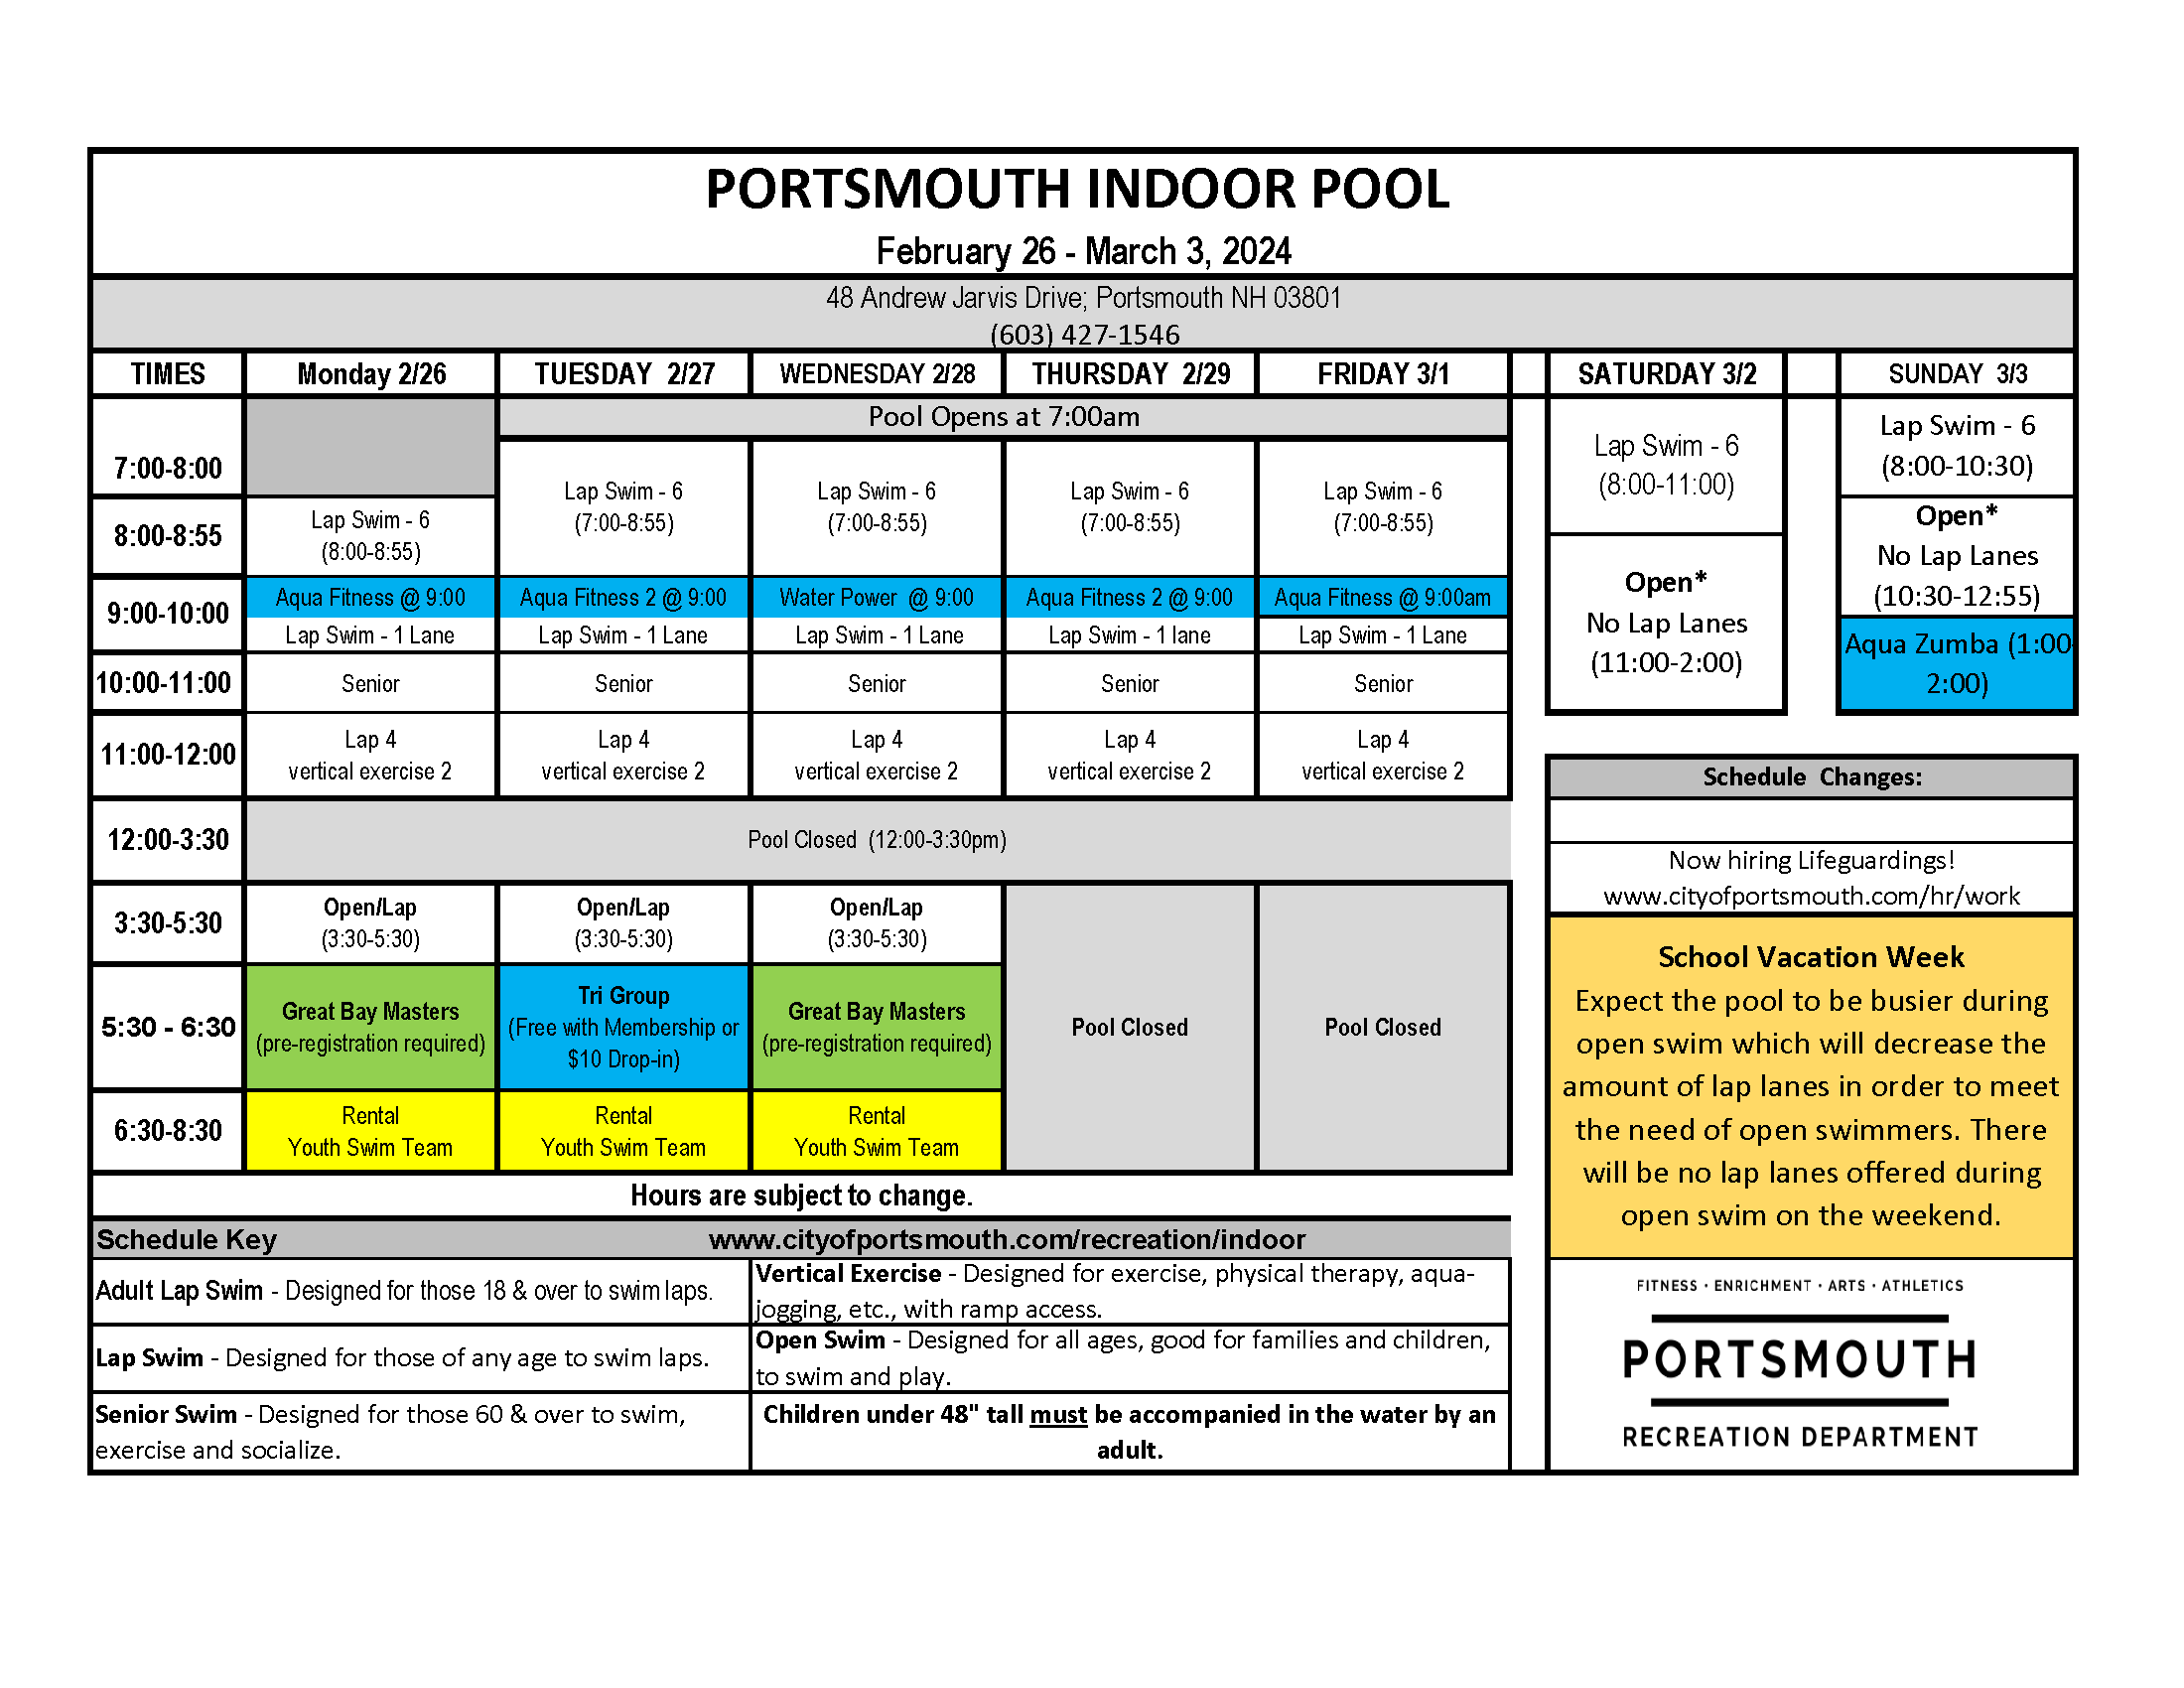 Pool schedule pic